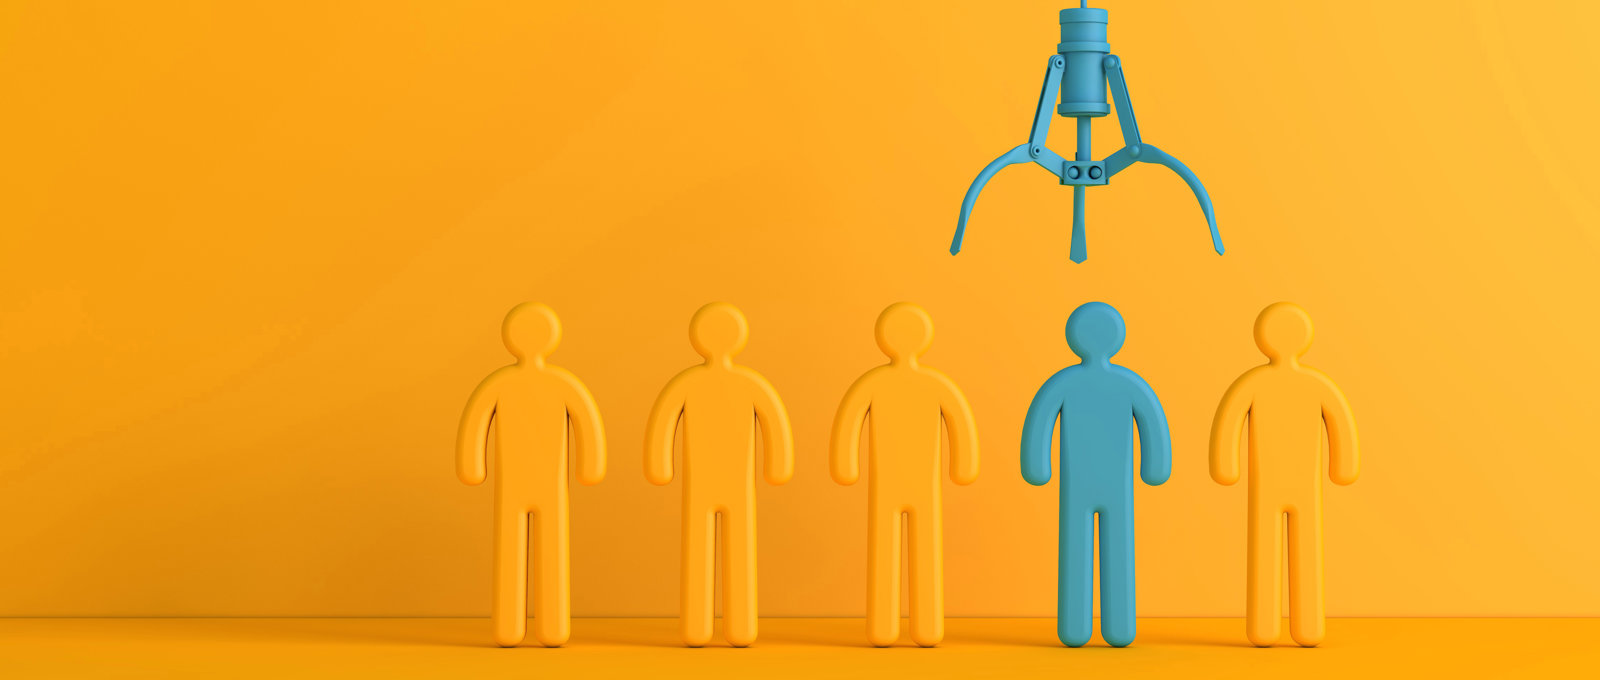 Photo of five 'cut out' figures standing against a bright orange background. Four figures are orange too. One is light blue and a blue 'grabber' is hanging above the blue figure.